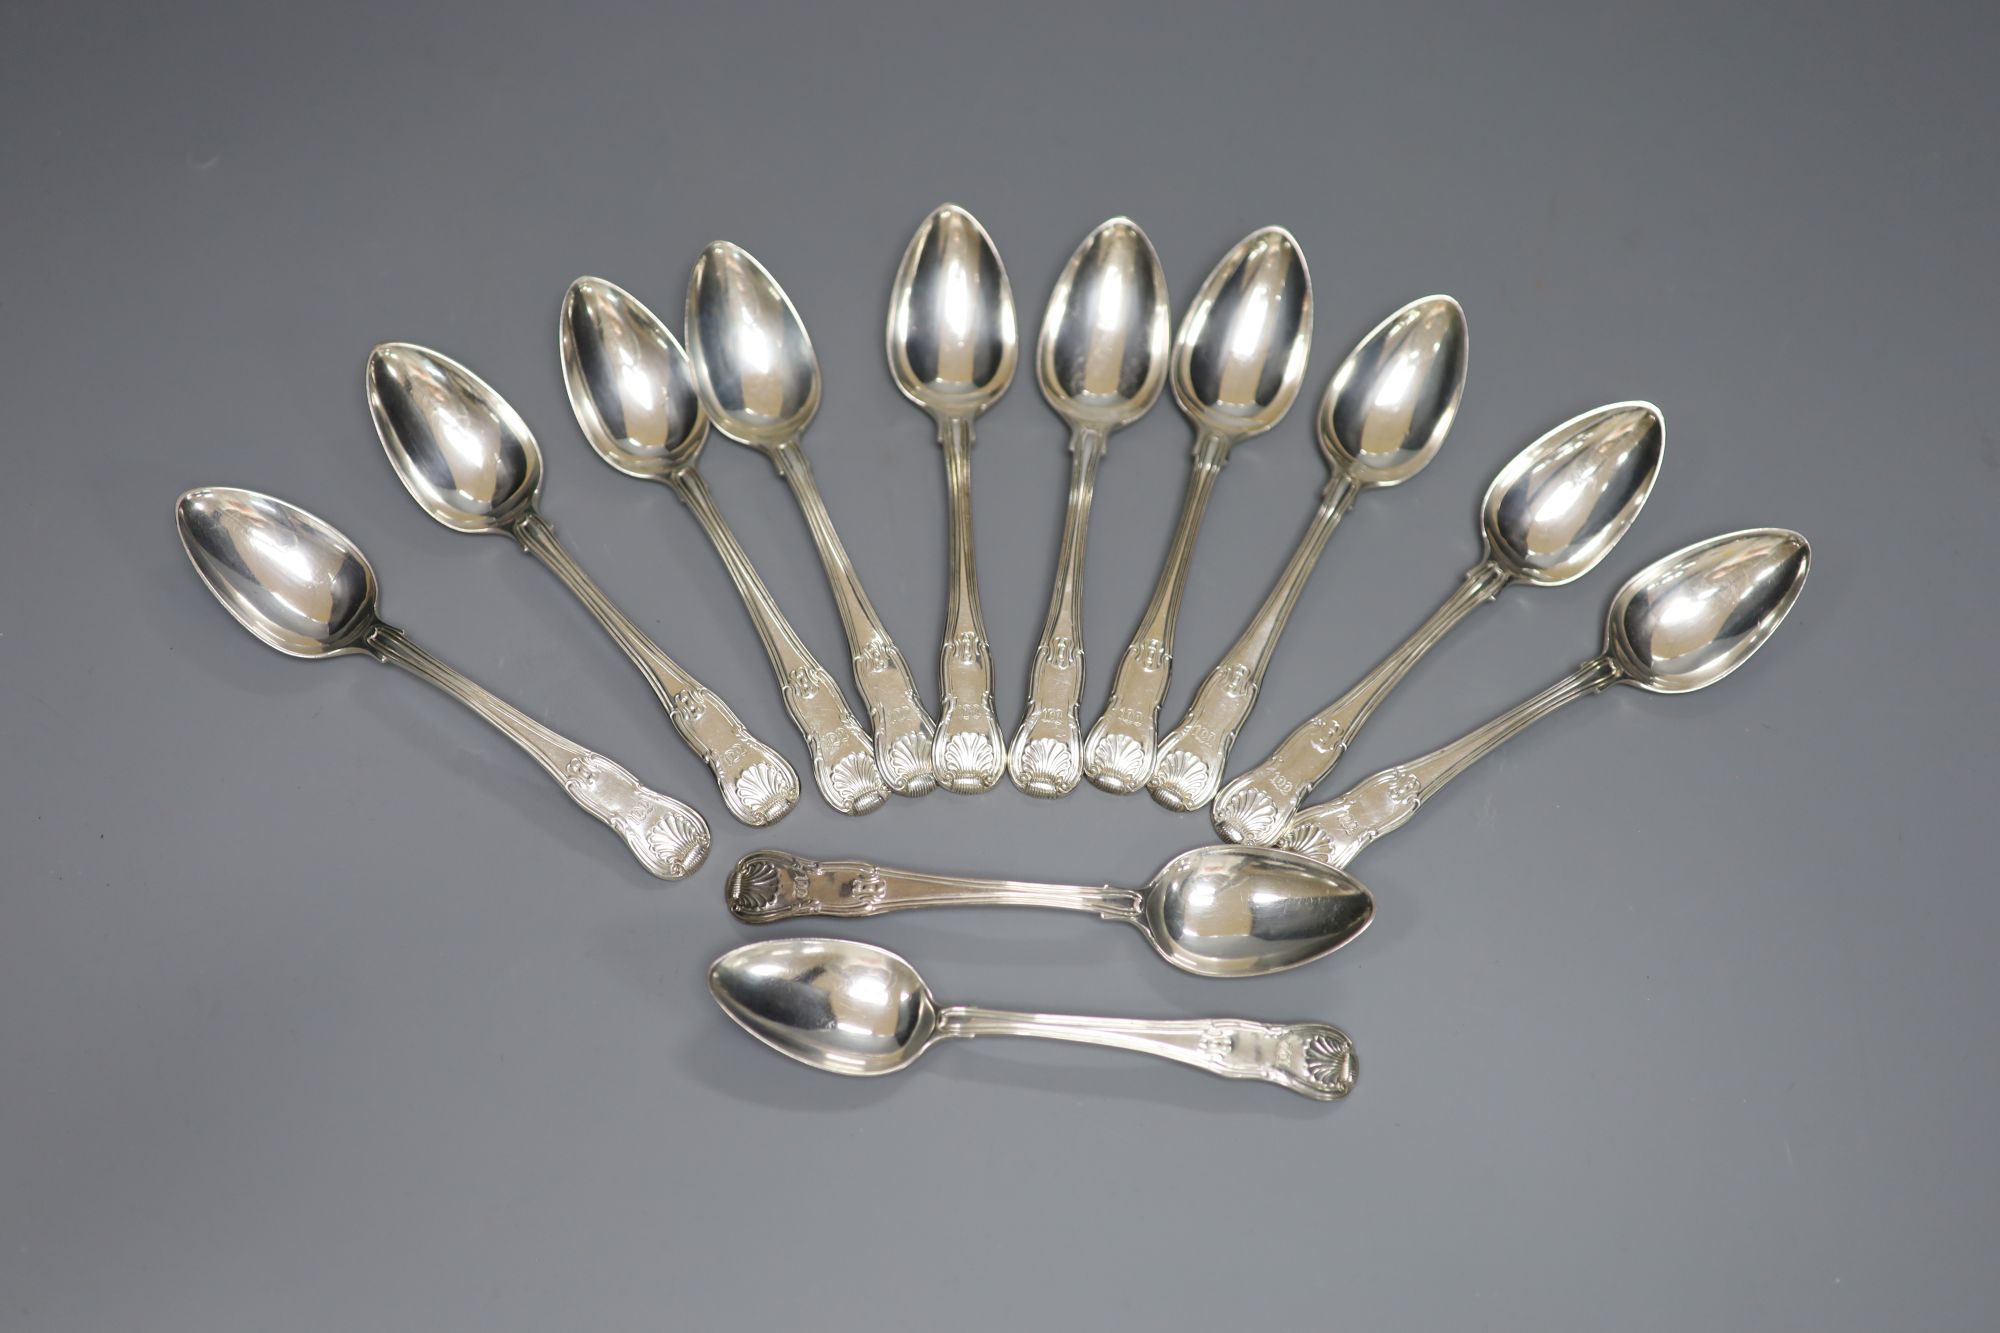 A matched set of twelve George III silver hourglass pattern teaspoons, various makers, London, 1817/8, 11oz.